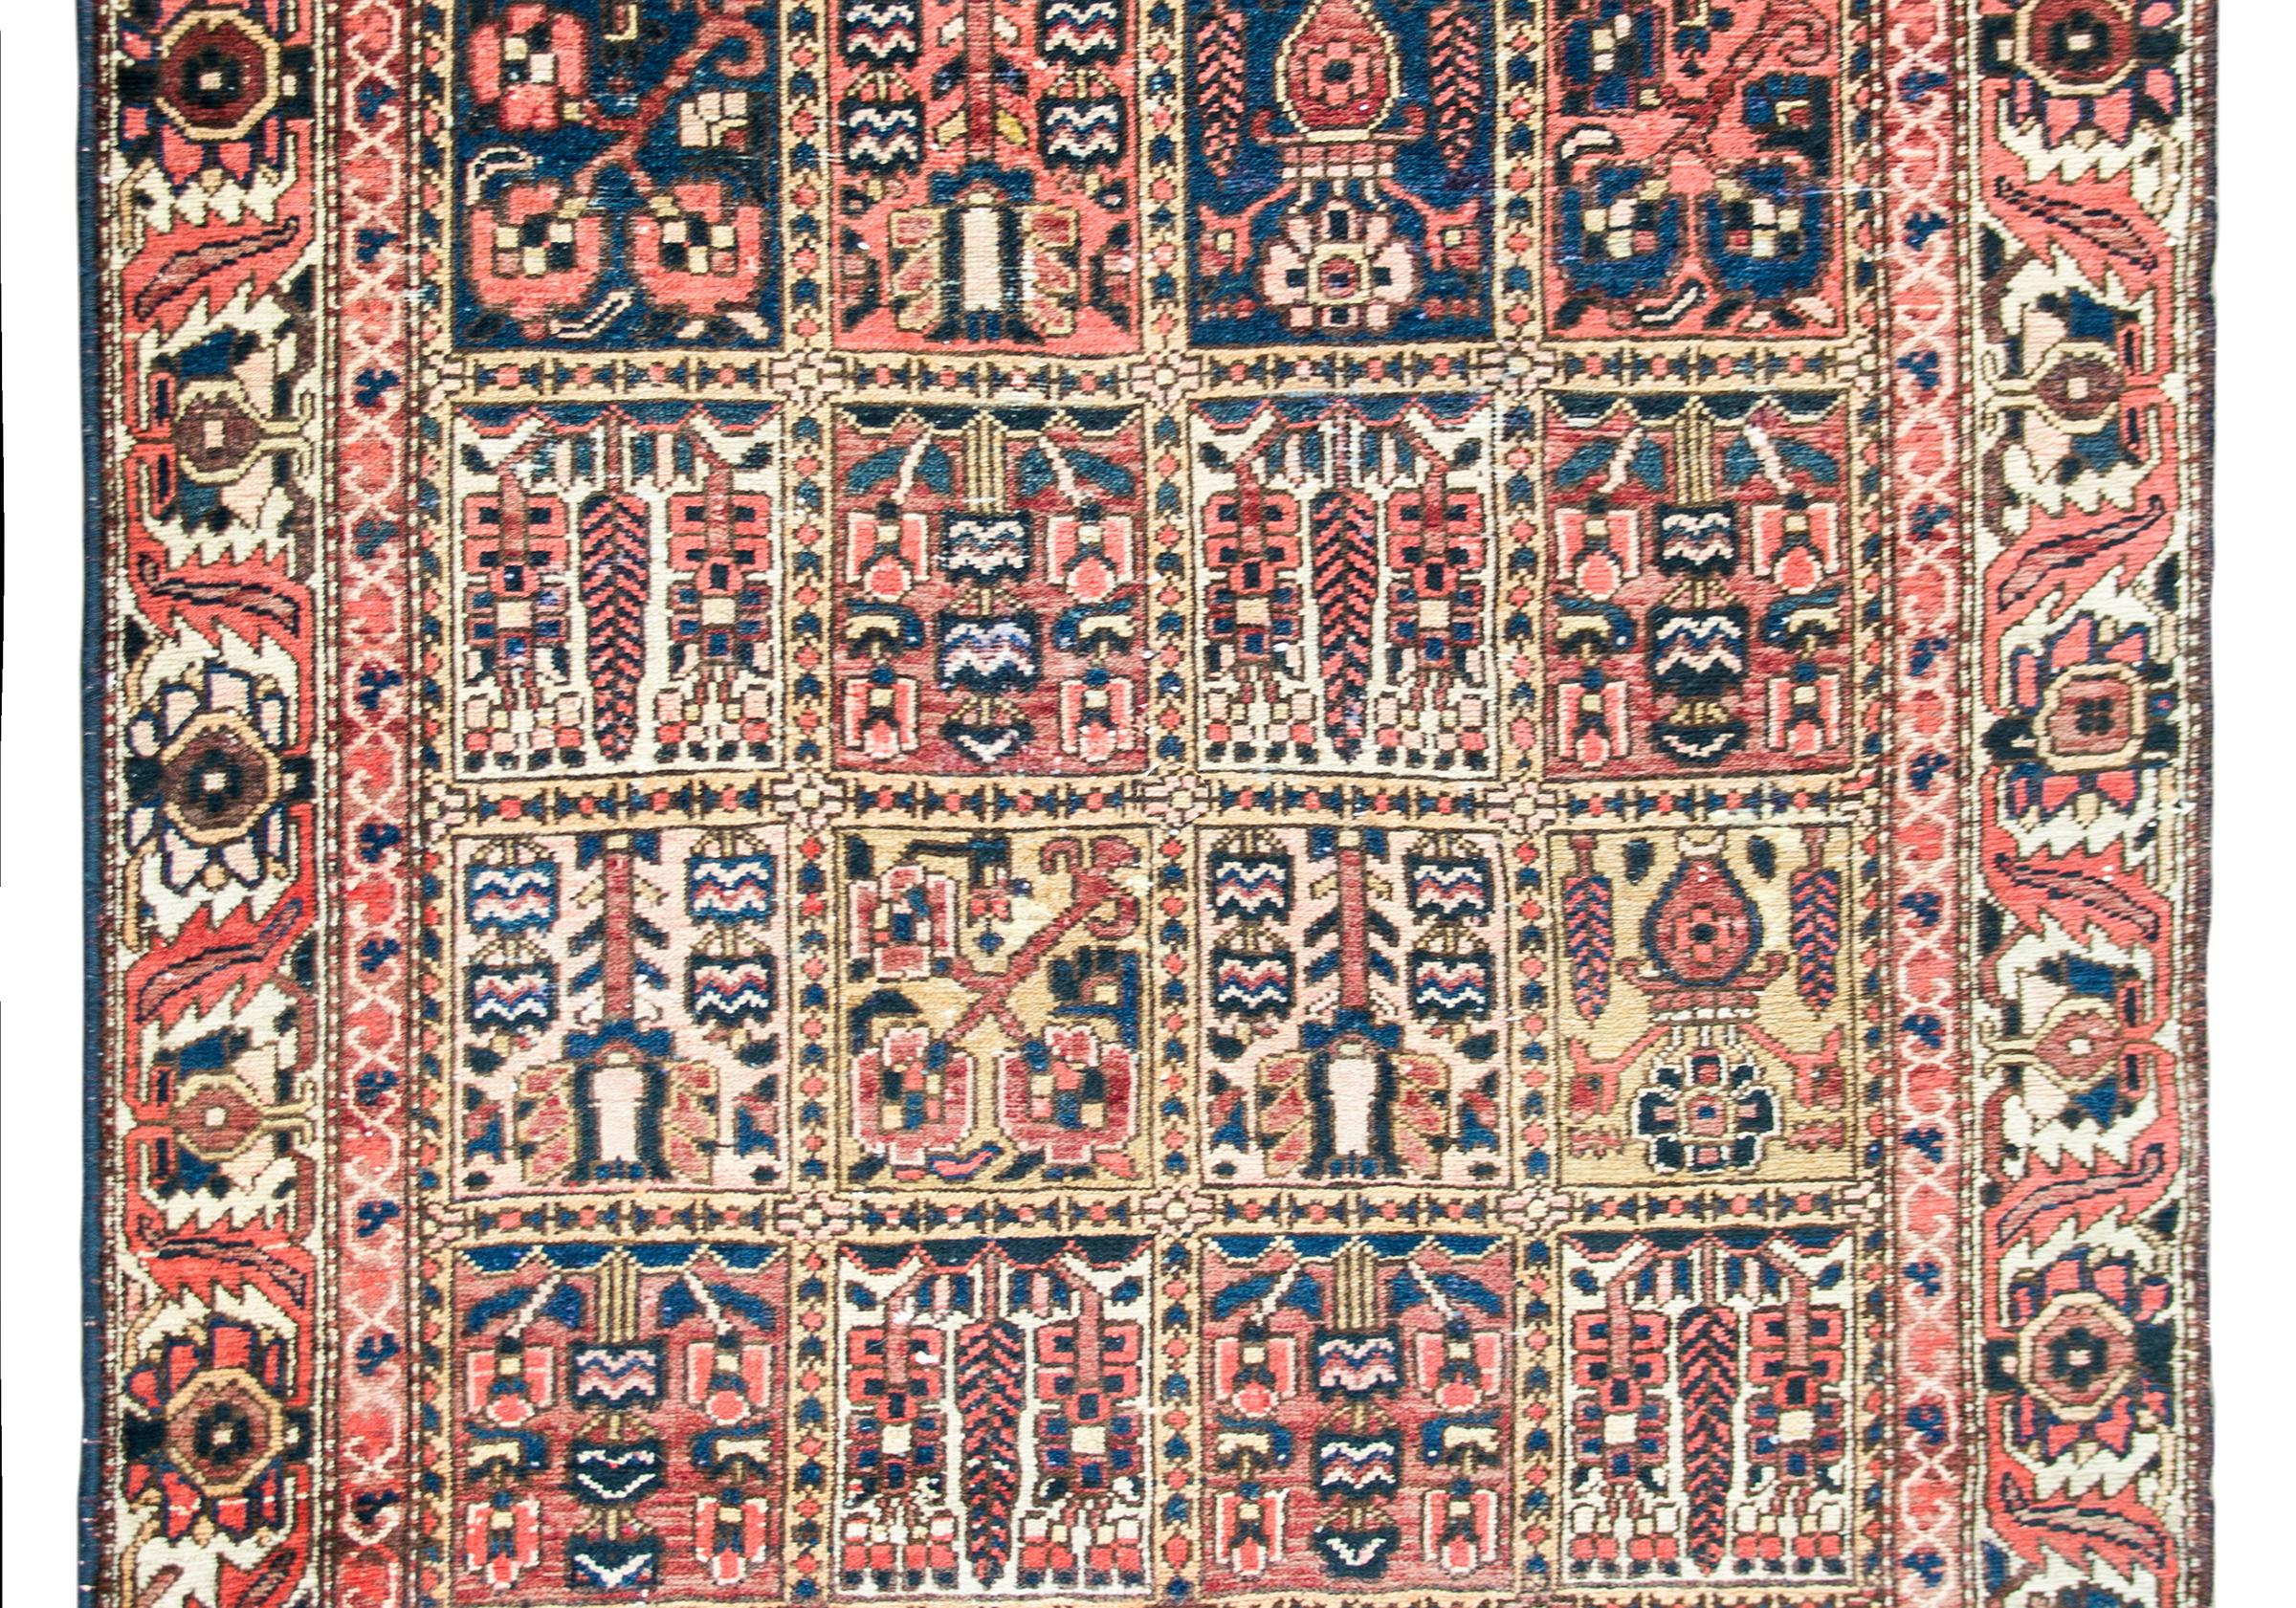 A wonderful early 20th century Persian Bakhtiari rug with a hand-woven patchwork pattern with myriad cypress trees and flowering shrubs surrounded by a wide scrolling vine and leaf border, and all woven in brilliant crimson, indigo, cream, green,